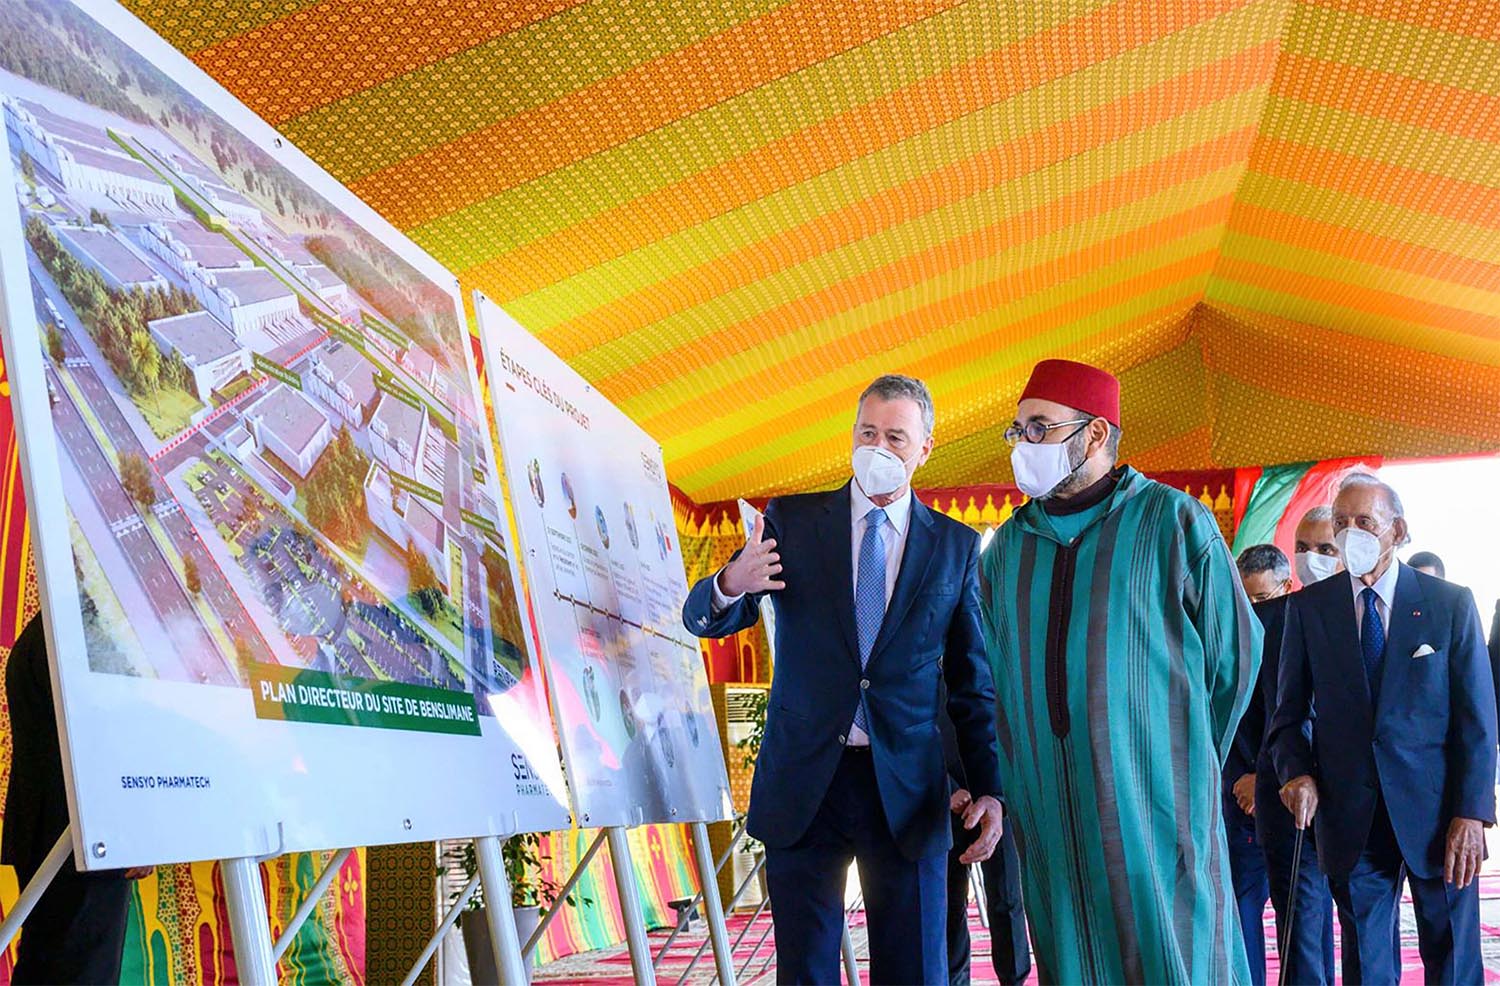 Morocco is taking another step towards effective and proactive management of the pandemic crisis and its consequences under the King’s leadership